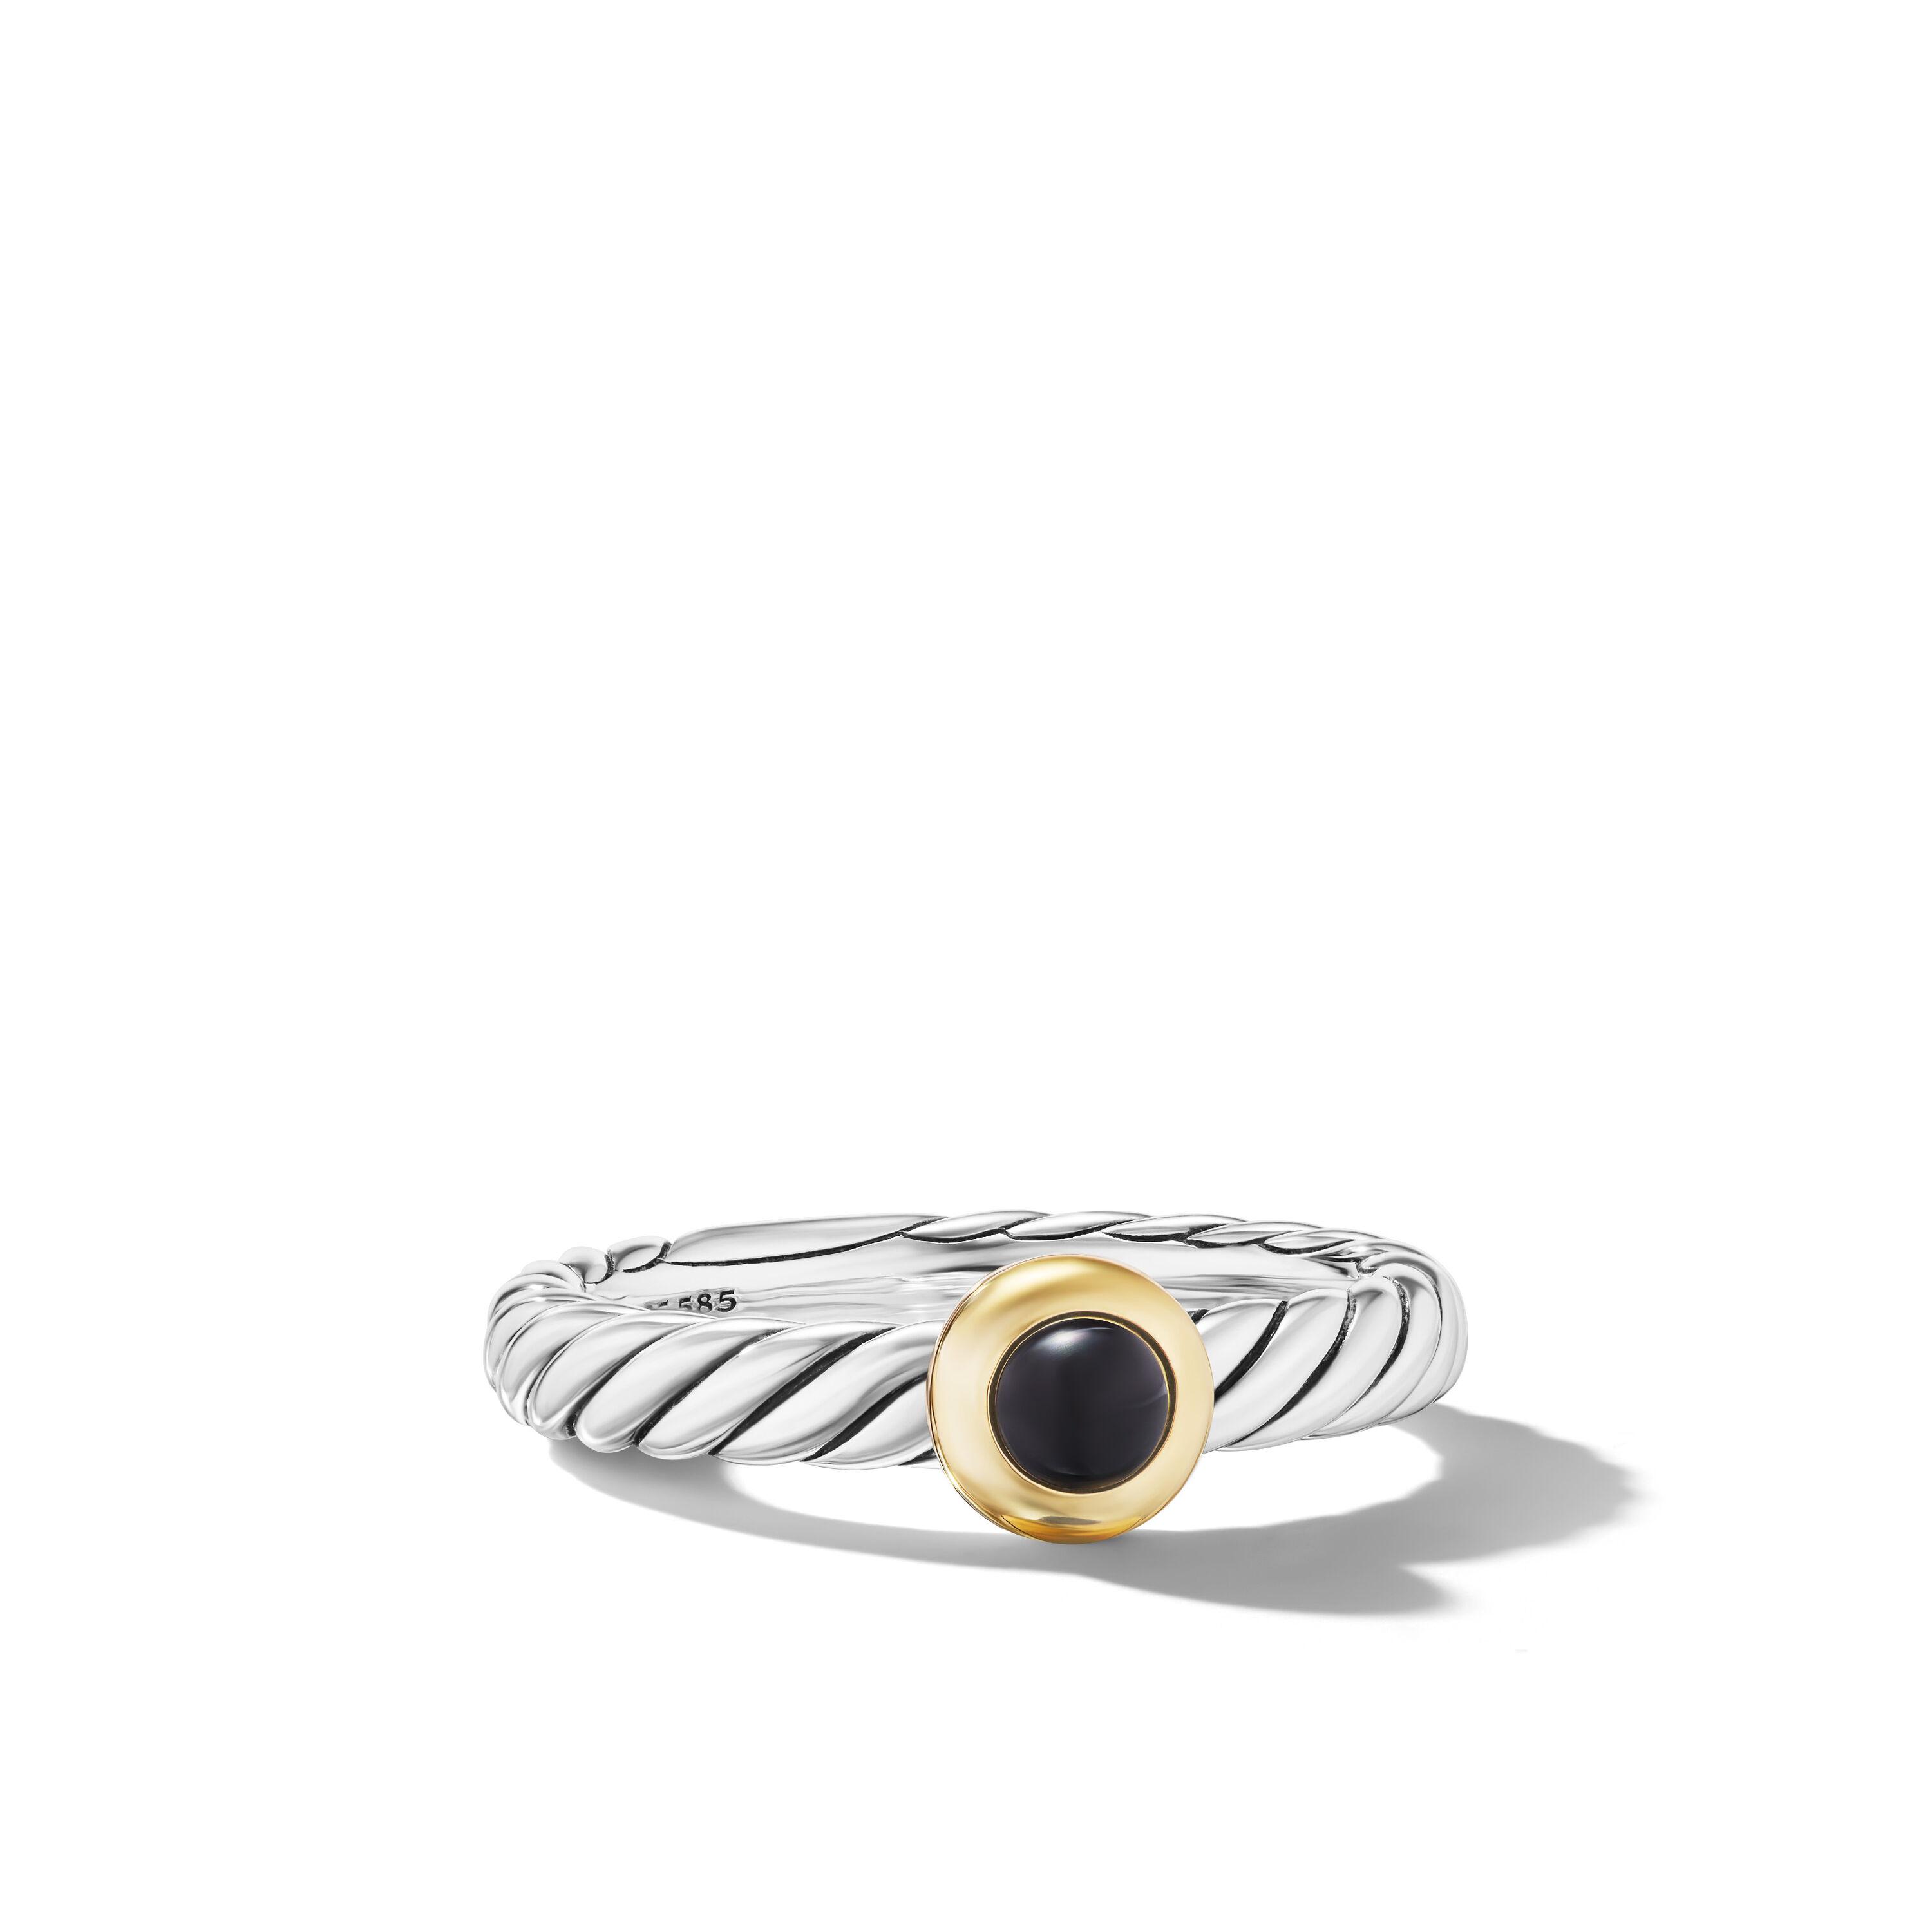 David Yurman Petite Cable Ring in Sterling Silver with 14K Yellow Gold and Black Onyx, Size 7